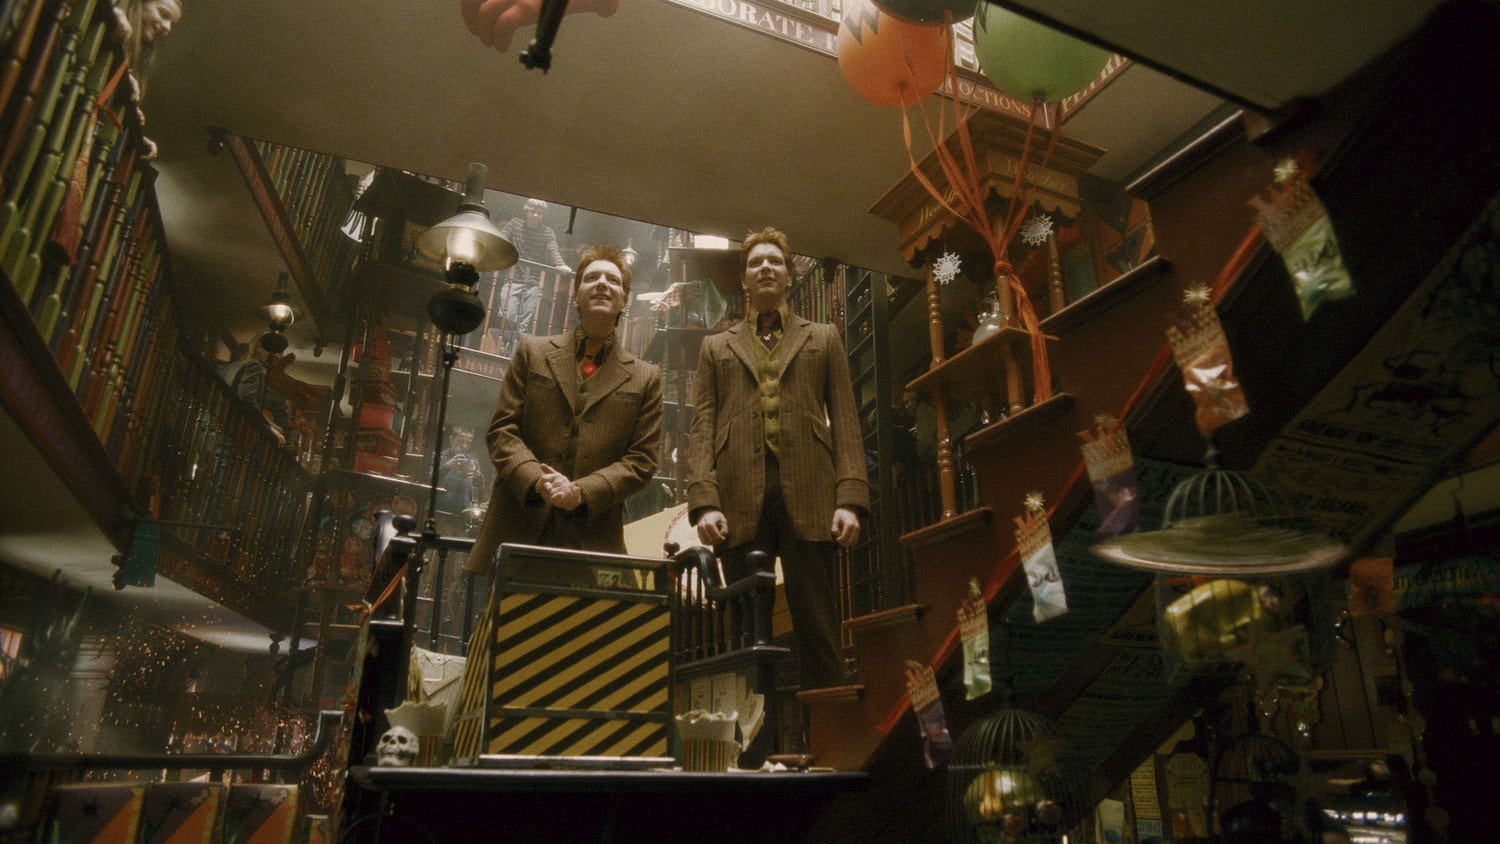 Fred and George at Weasleys’ Wizard Wheezes